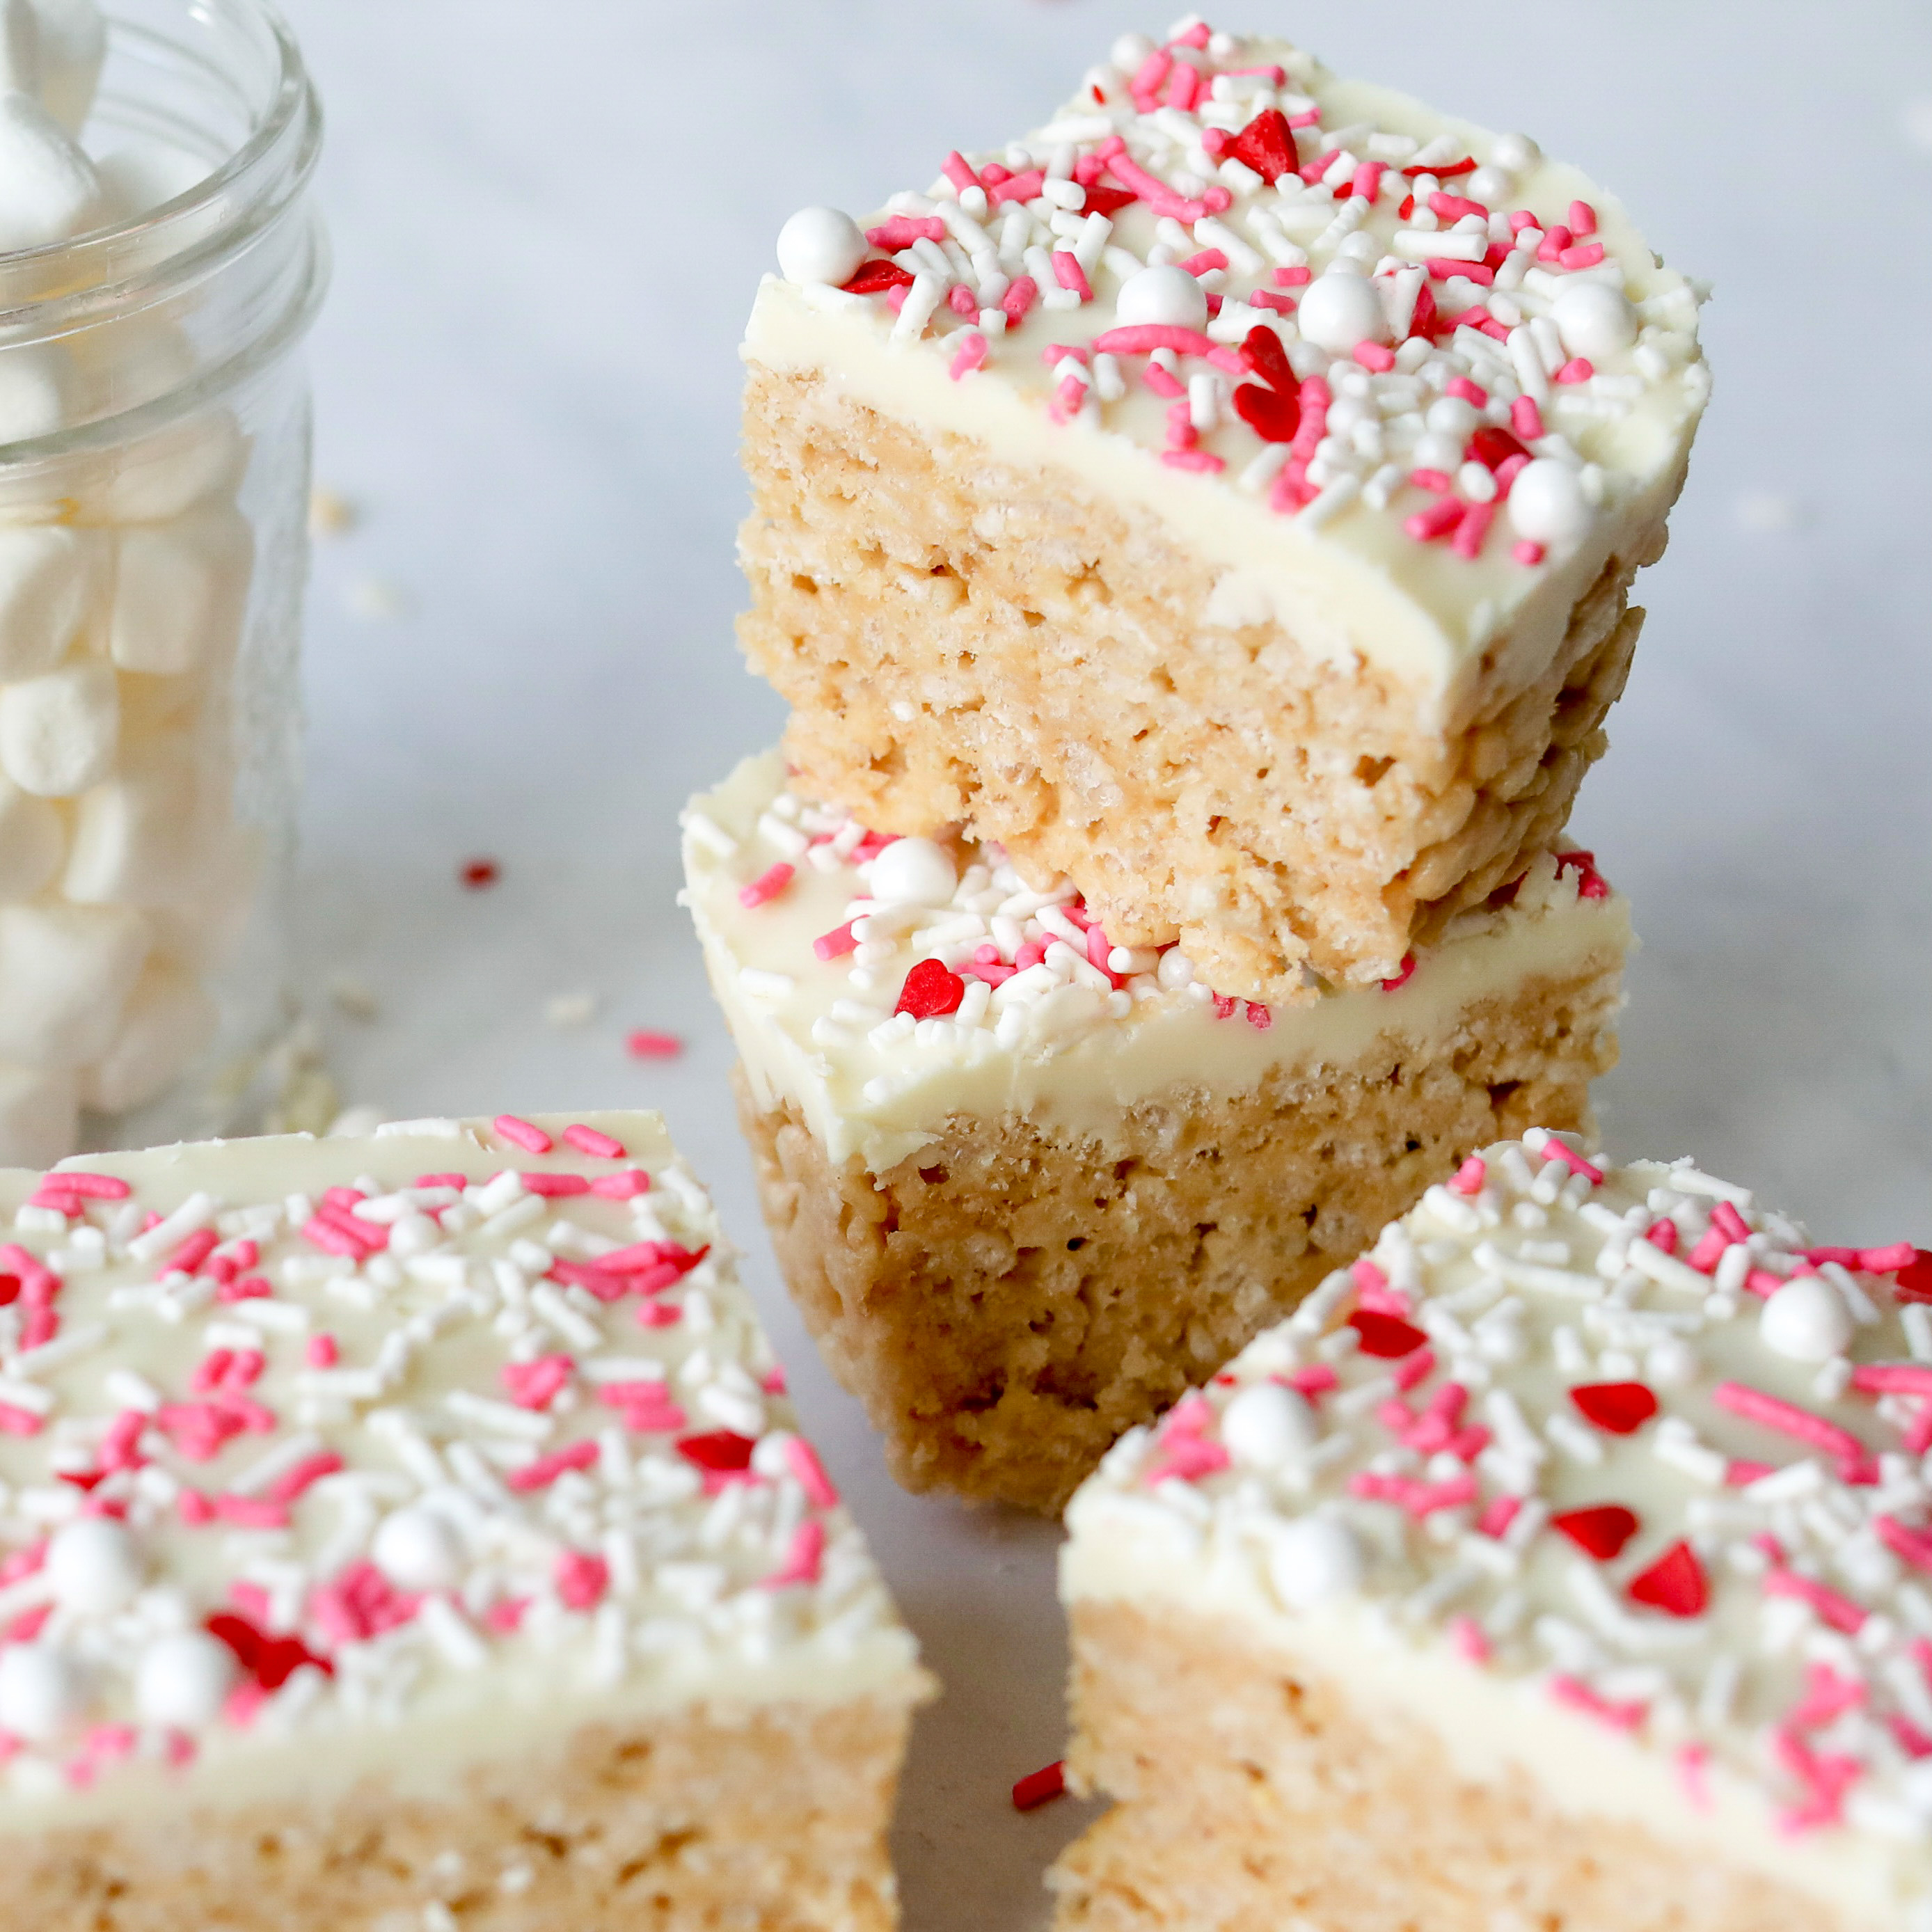 Easy Kid Friendly Valentine's Inspired Cereal Bar with one bar in focus showing themed sprinkles on top.